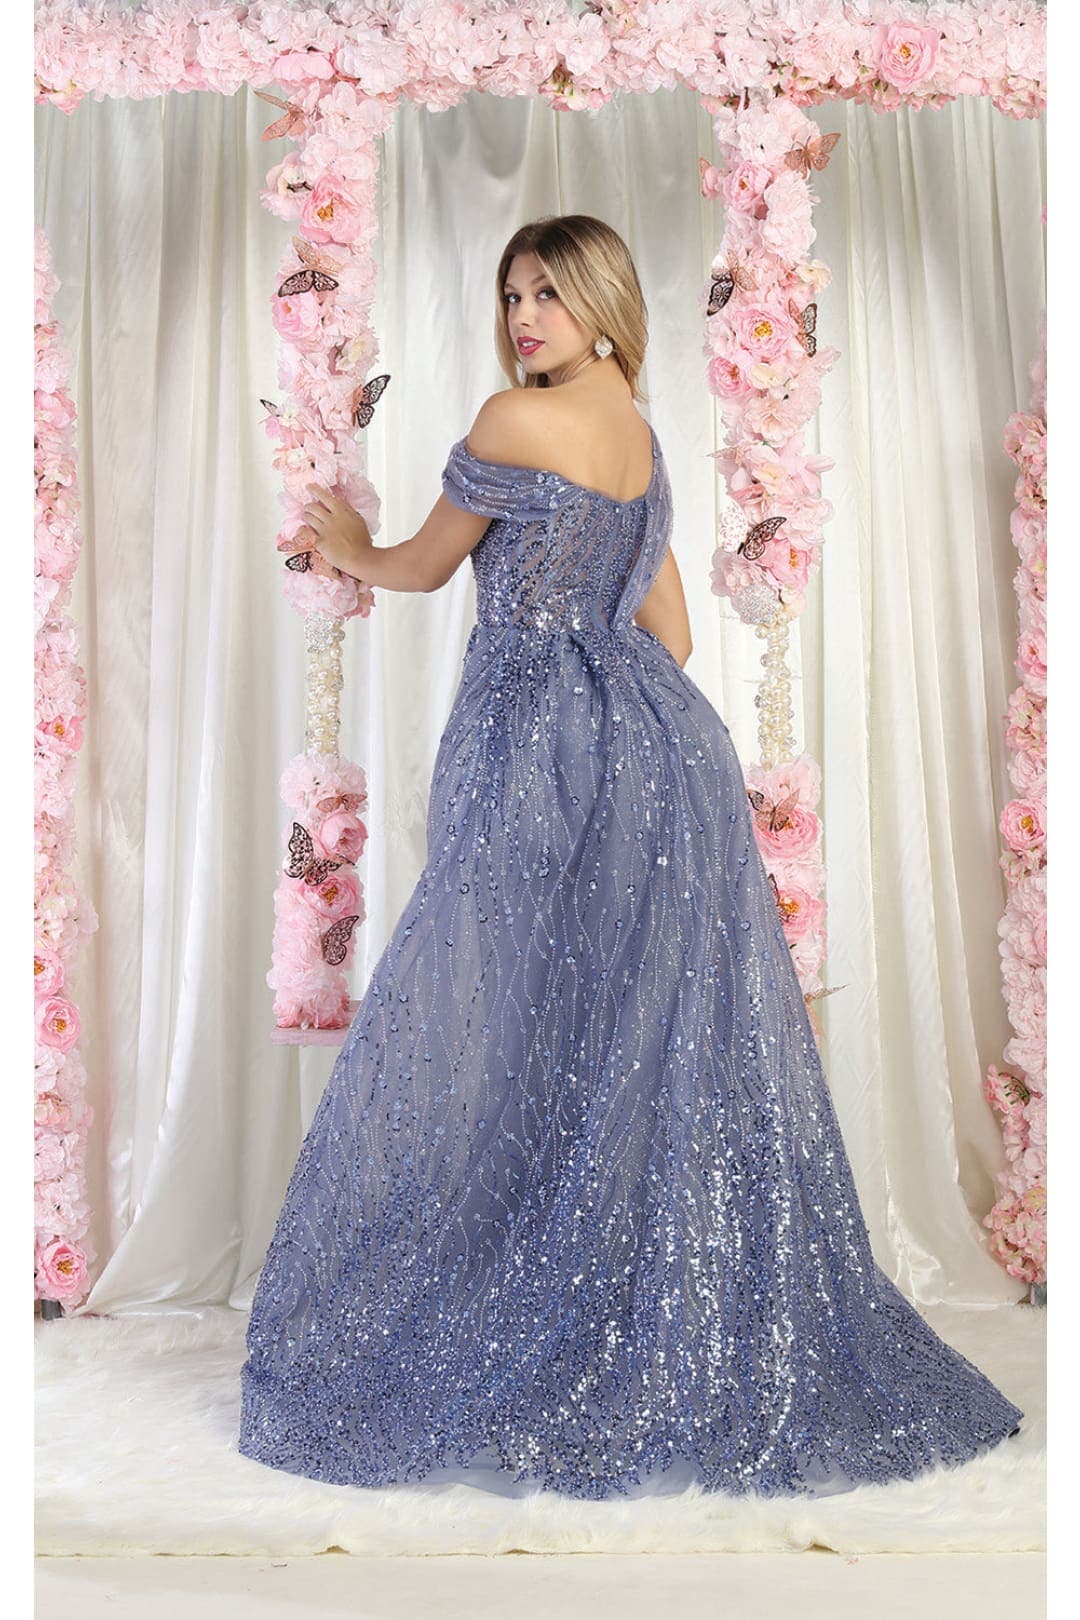 Royal Queen RQ8029 Convertible Special Occasion Gown - Dress